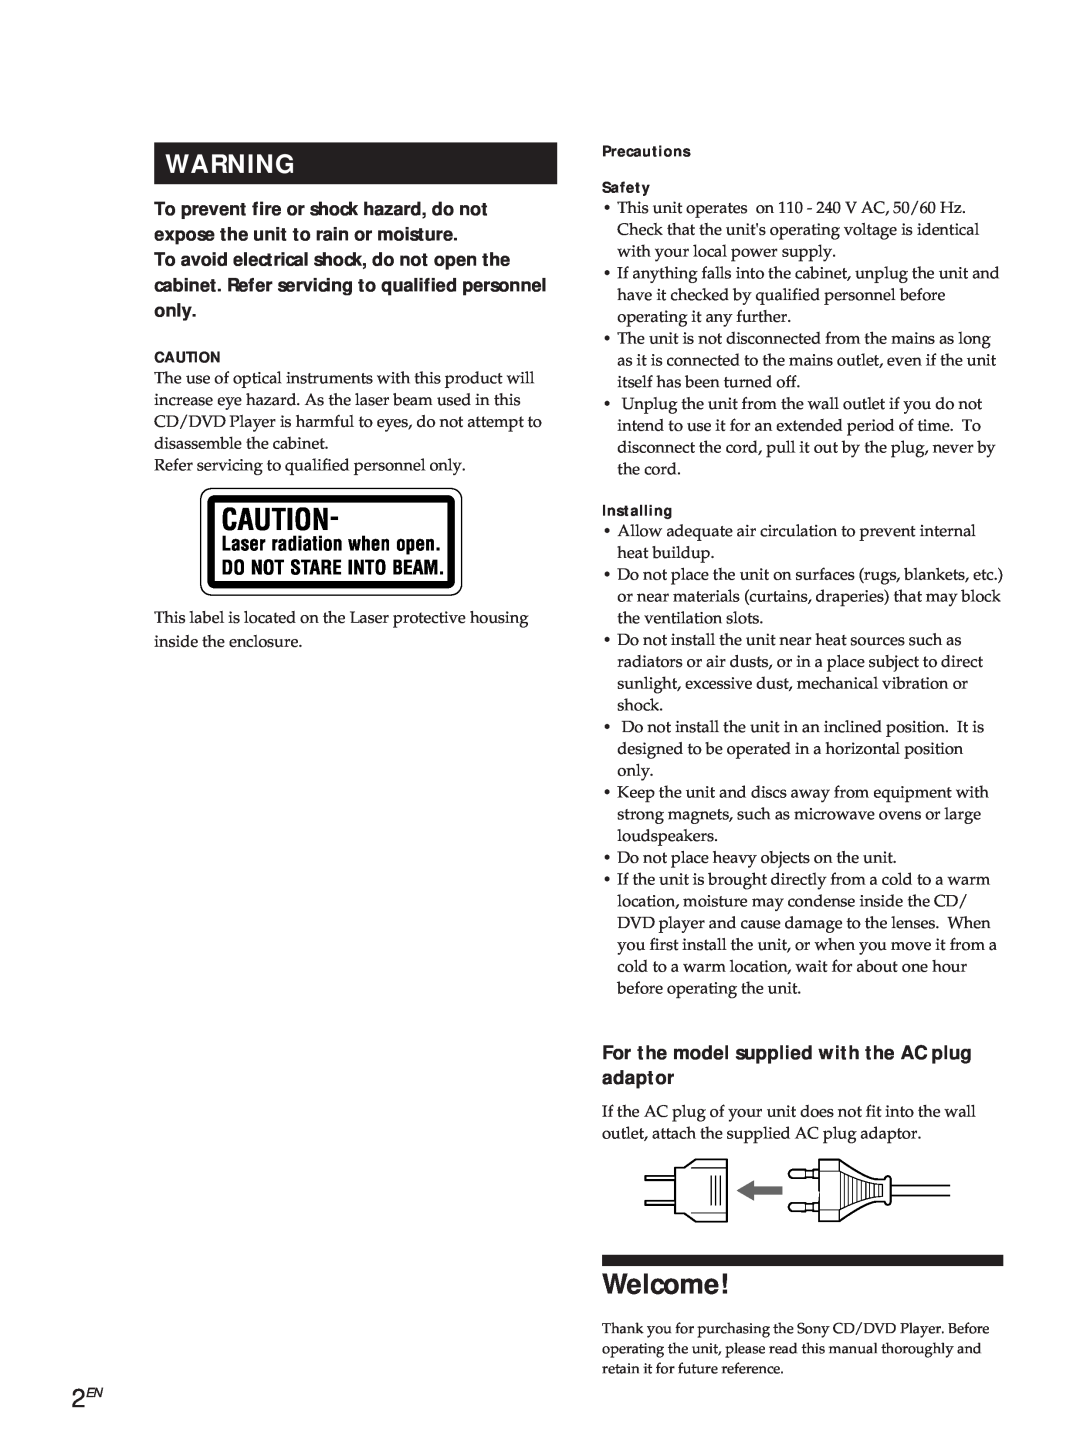 Sony DVP-S500D manual Welcome, For the model supplied with the AC plug adaptor 